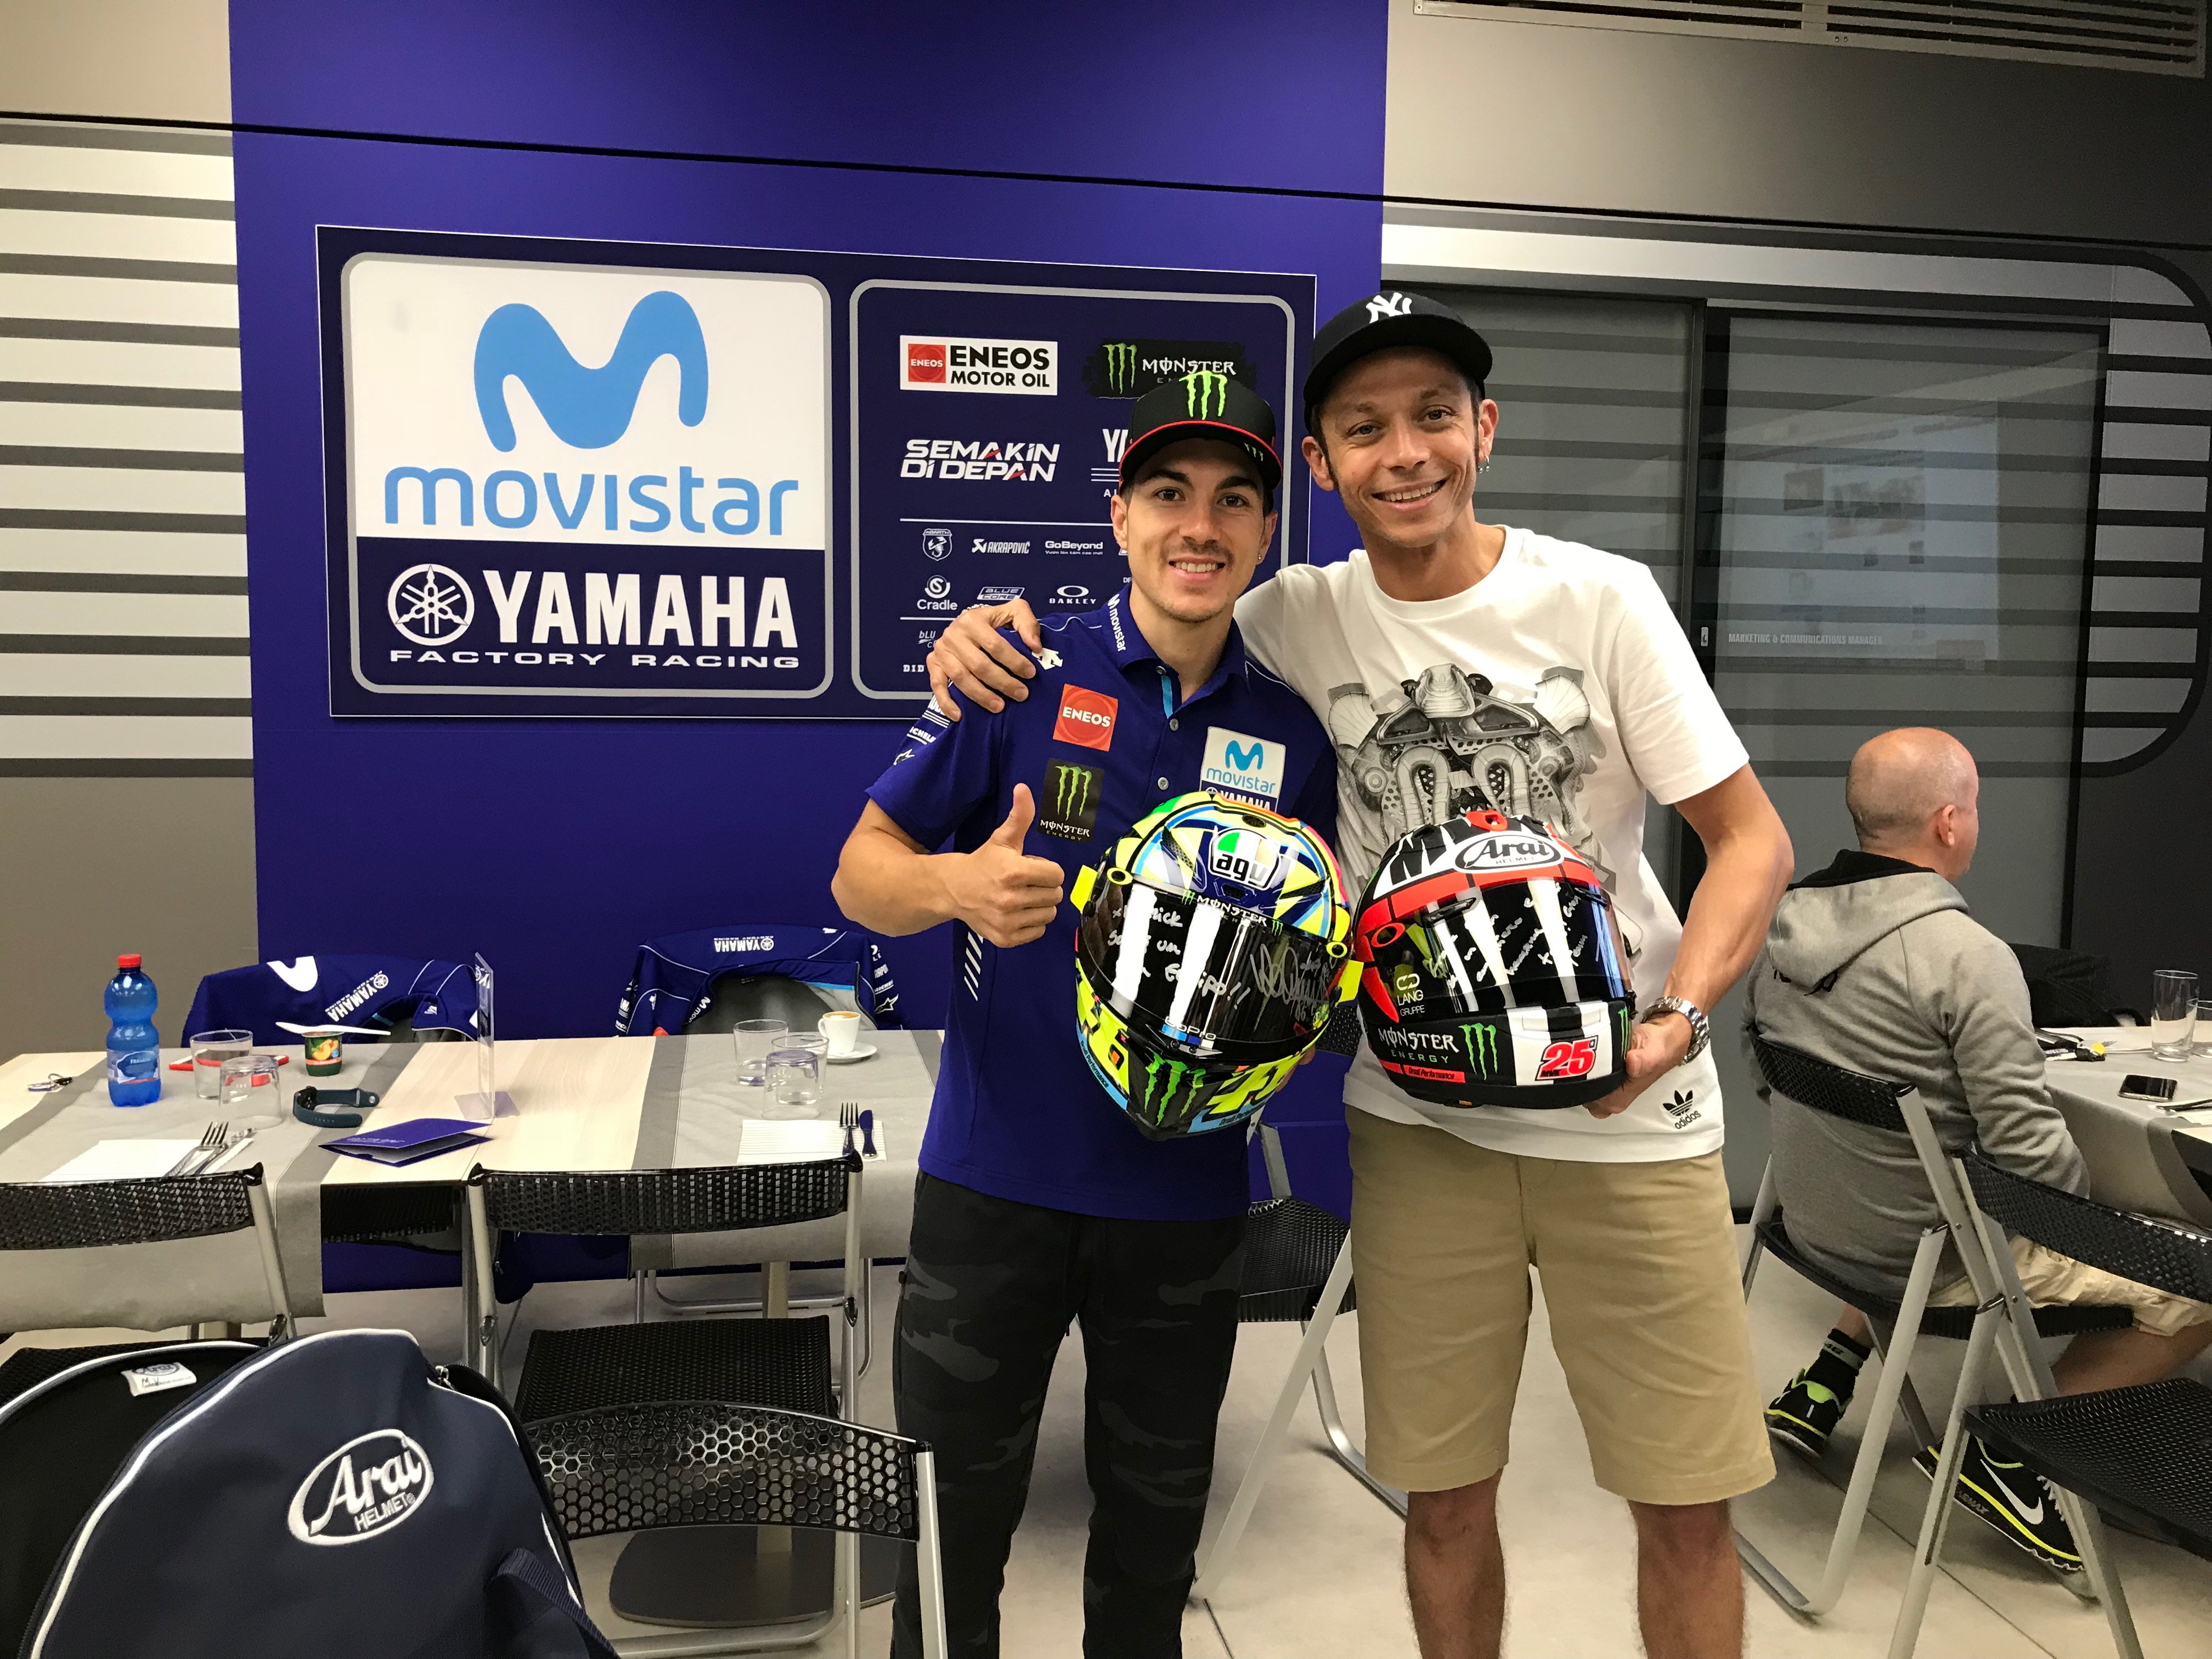 Monster Energy Yamaha MotoGP on Twitter: "Positive vibes in our new  hospitality. @valeyellow46 and @maverickmack25 exchange helmets at the  start of the #SpanishGP weekend. #MovistarYamaha | #MotoGP  https://t.co/ReMn8yivRF" / Twitter